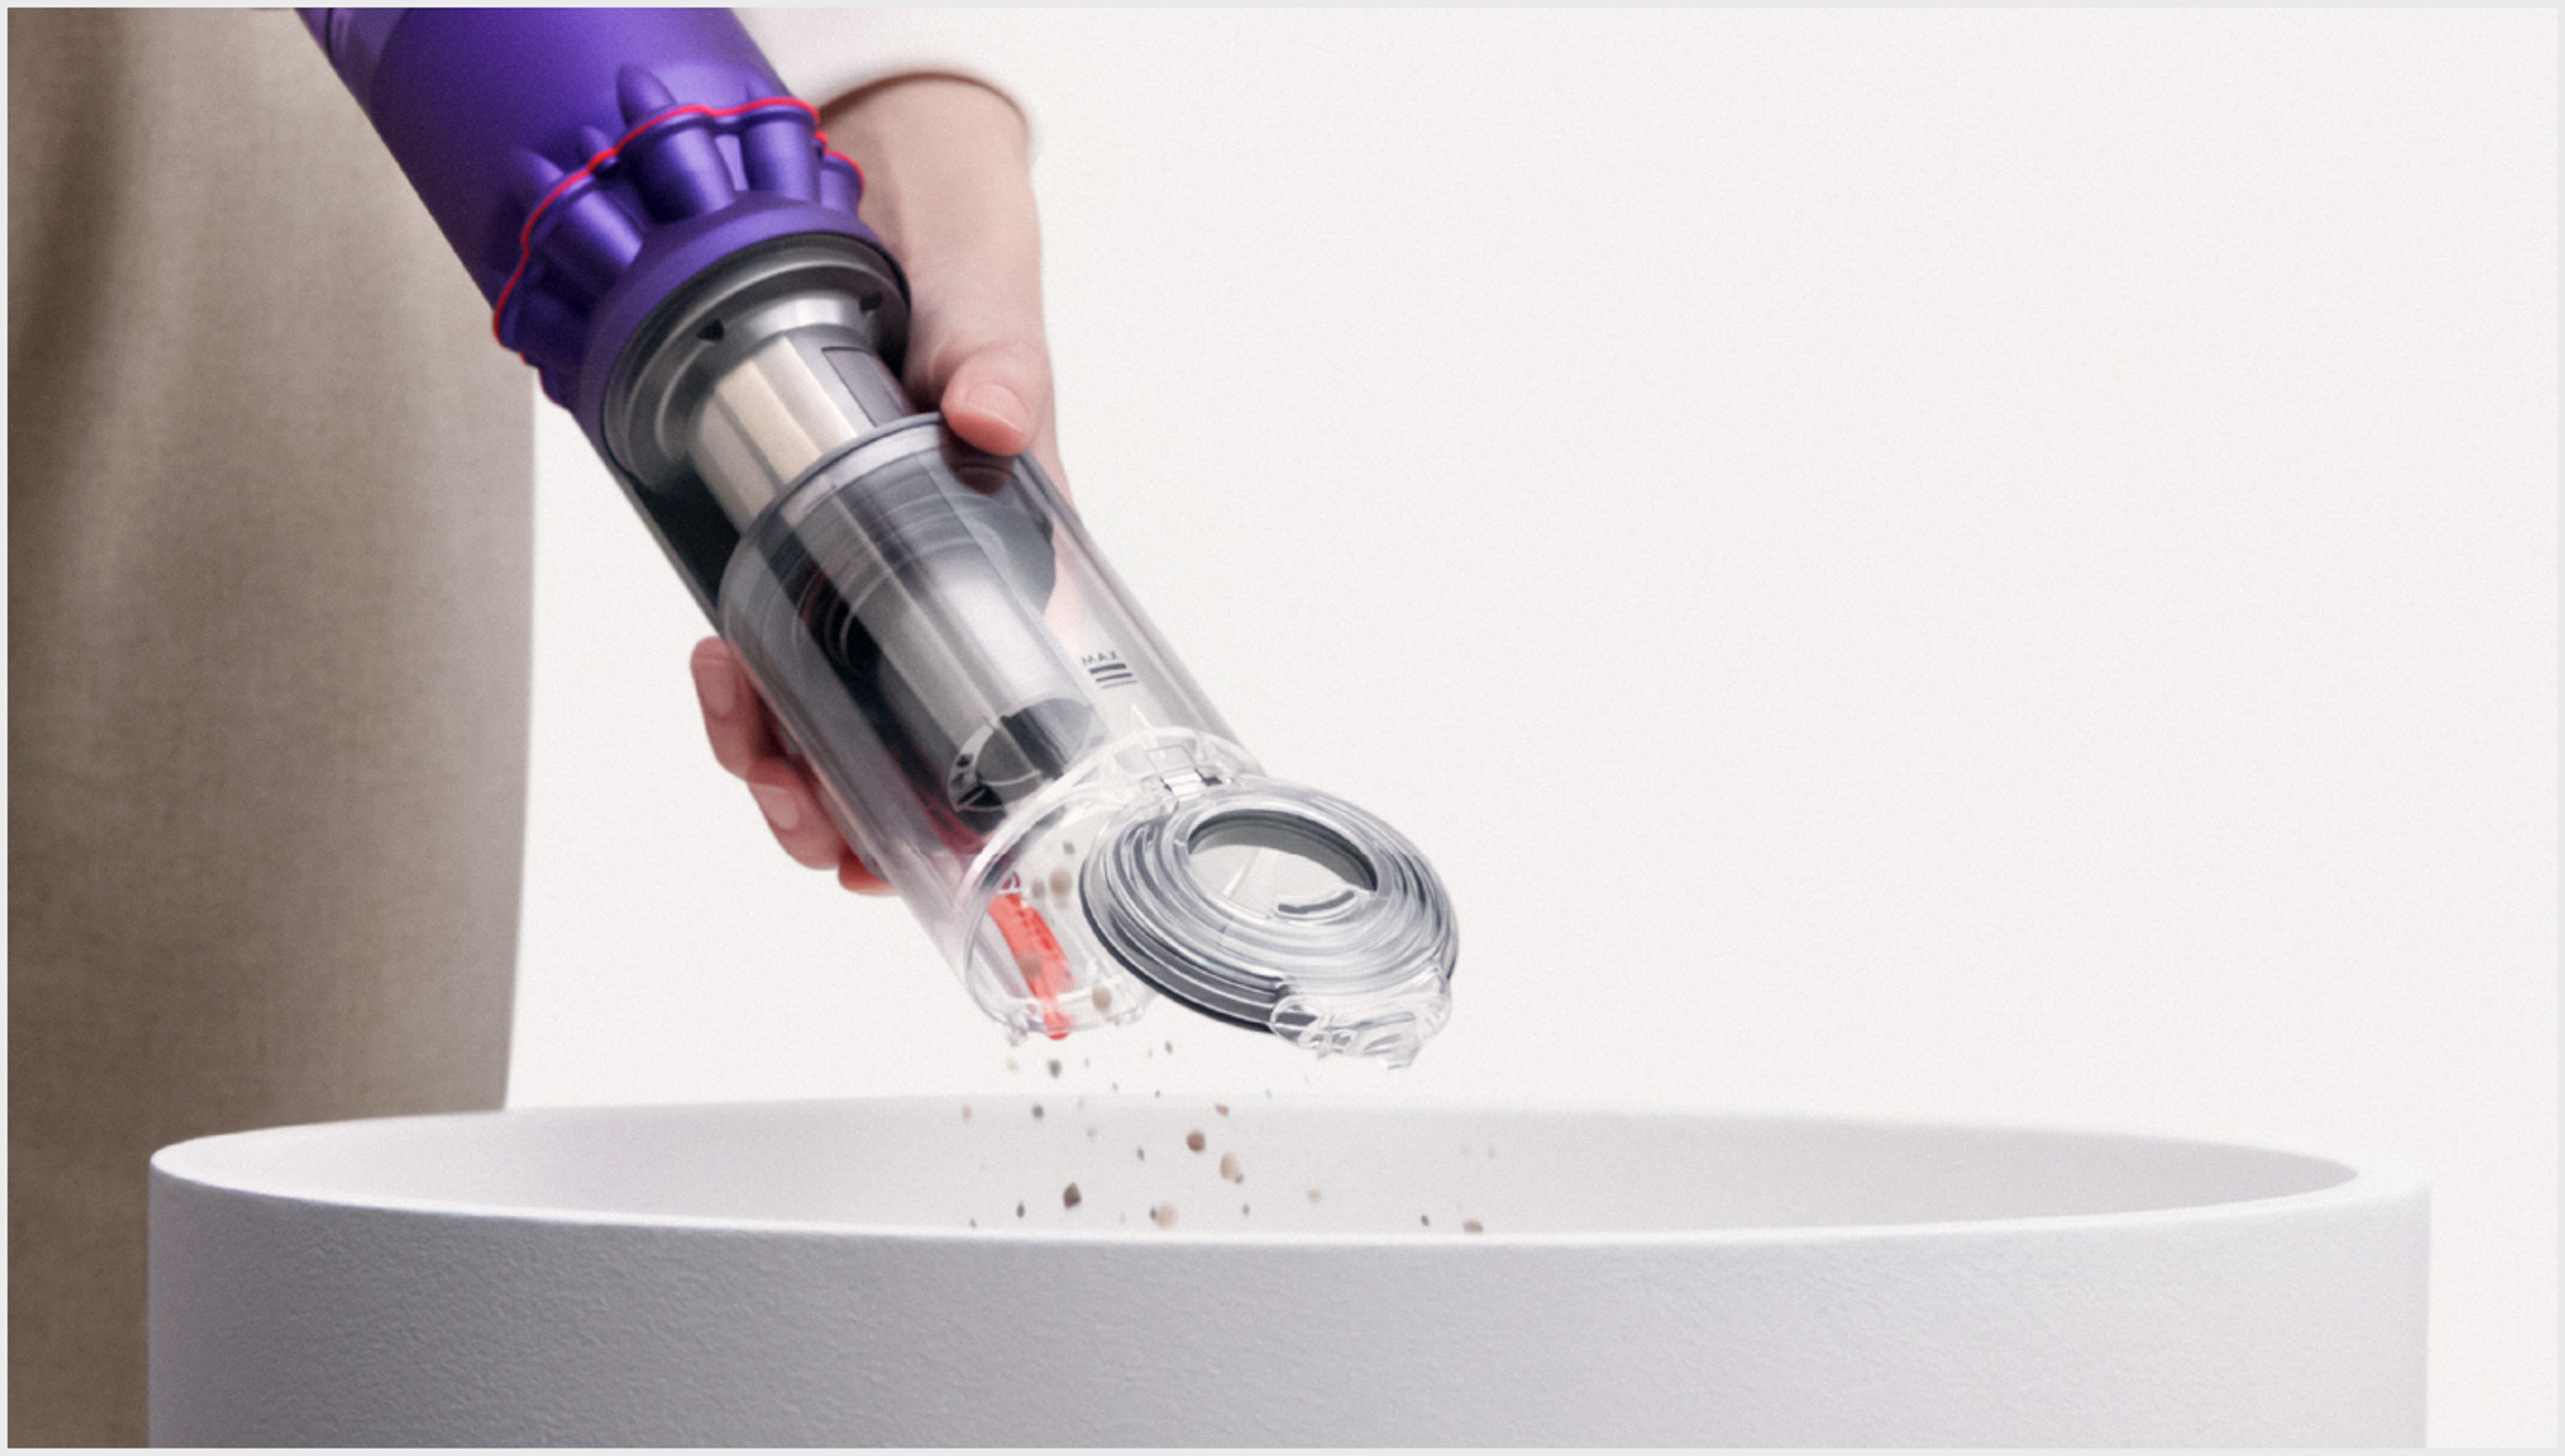 The Dyson Omni-glide vacuum ejecting just into the bin